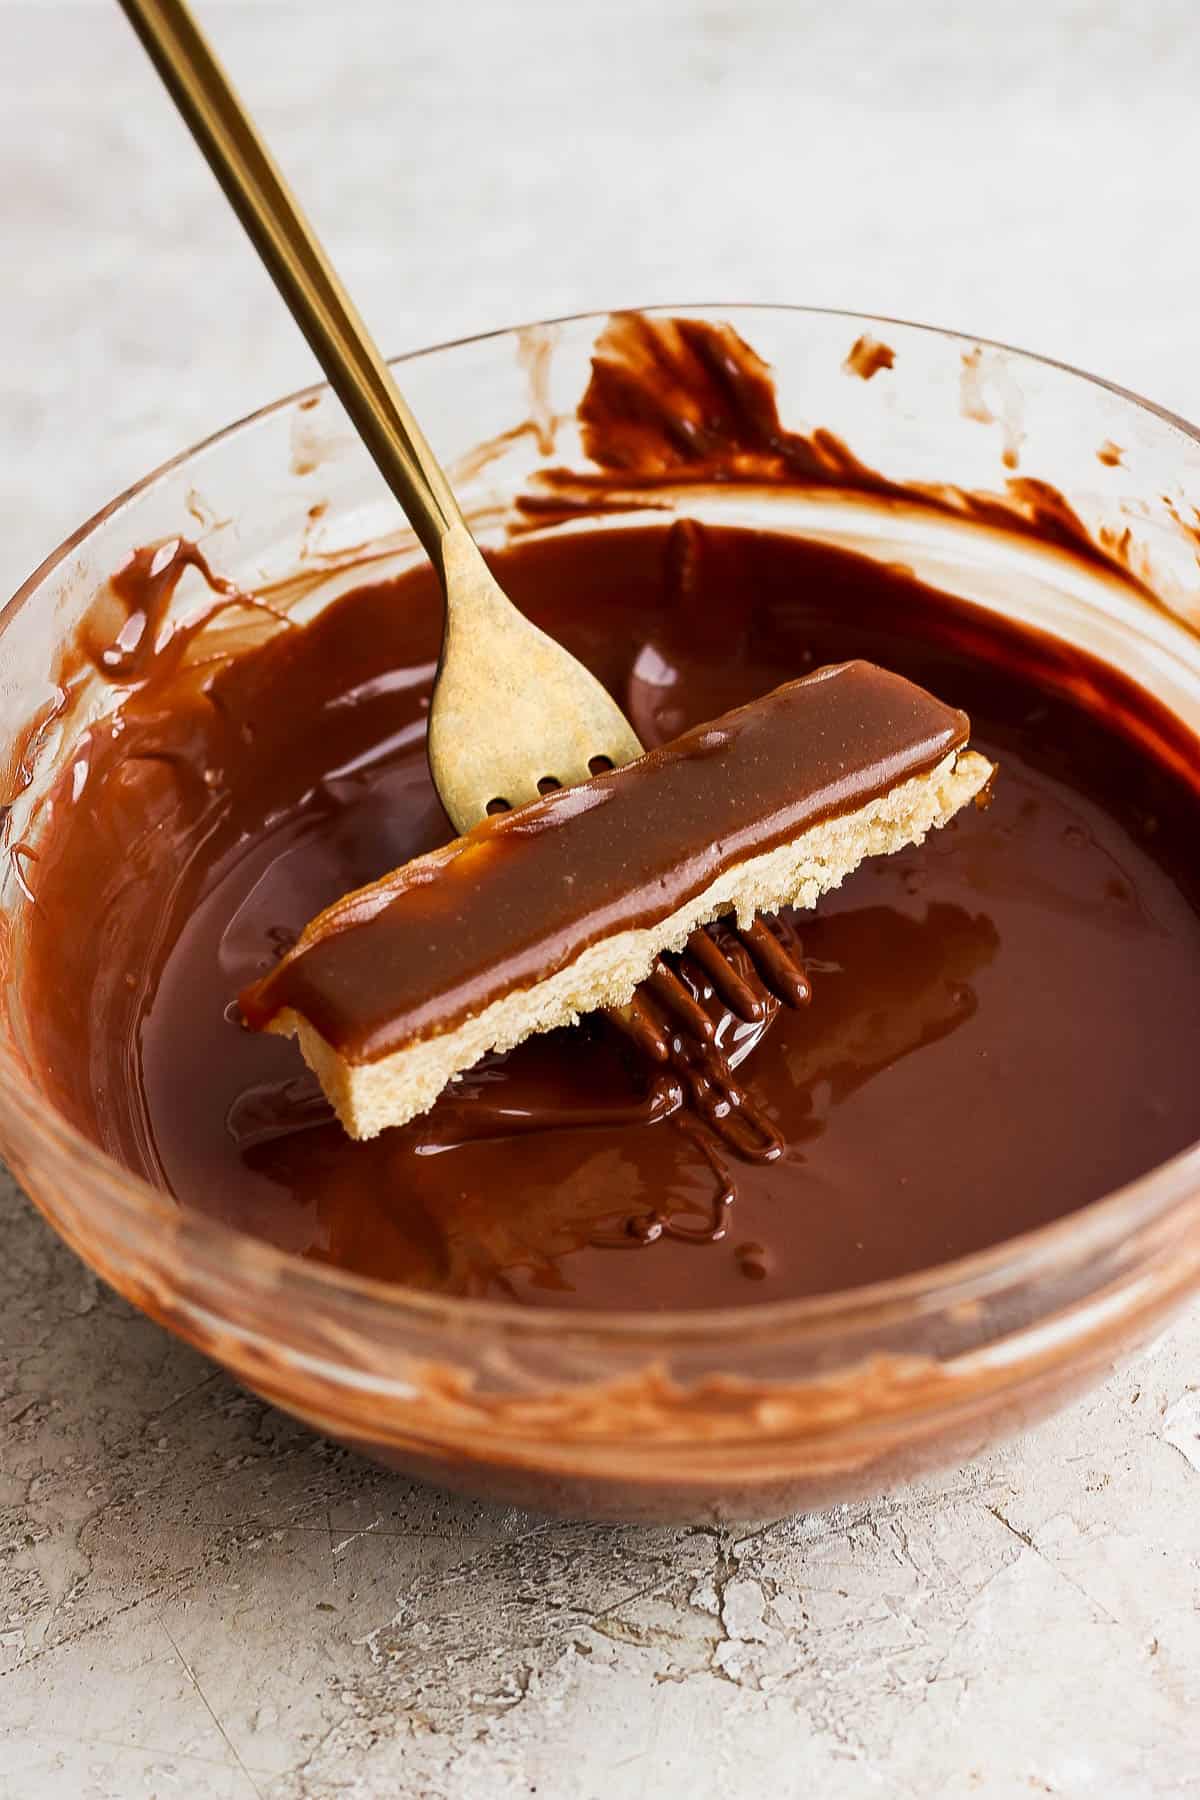 A fork holding a twix bar over the bowl of melted chocolate.